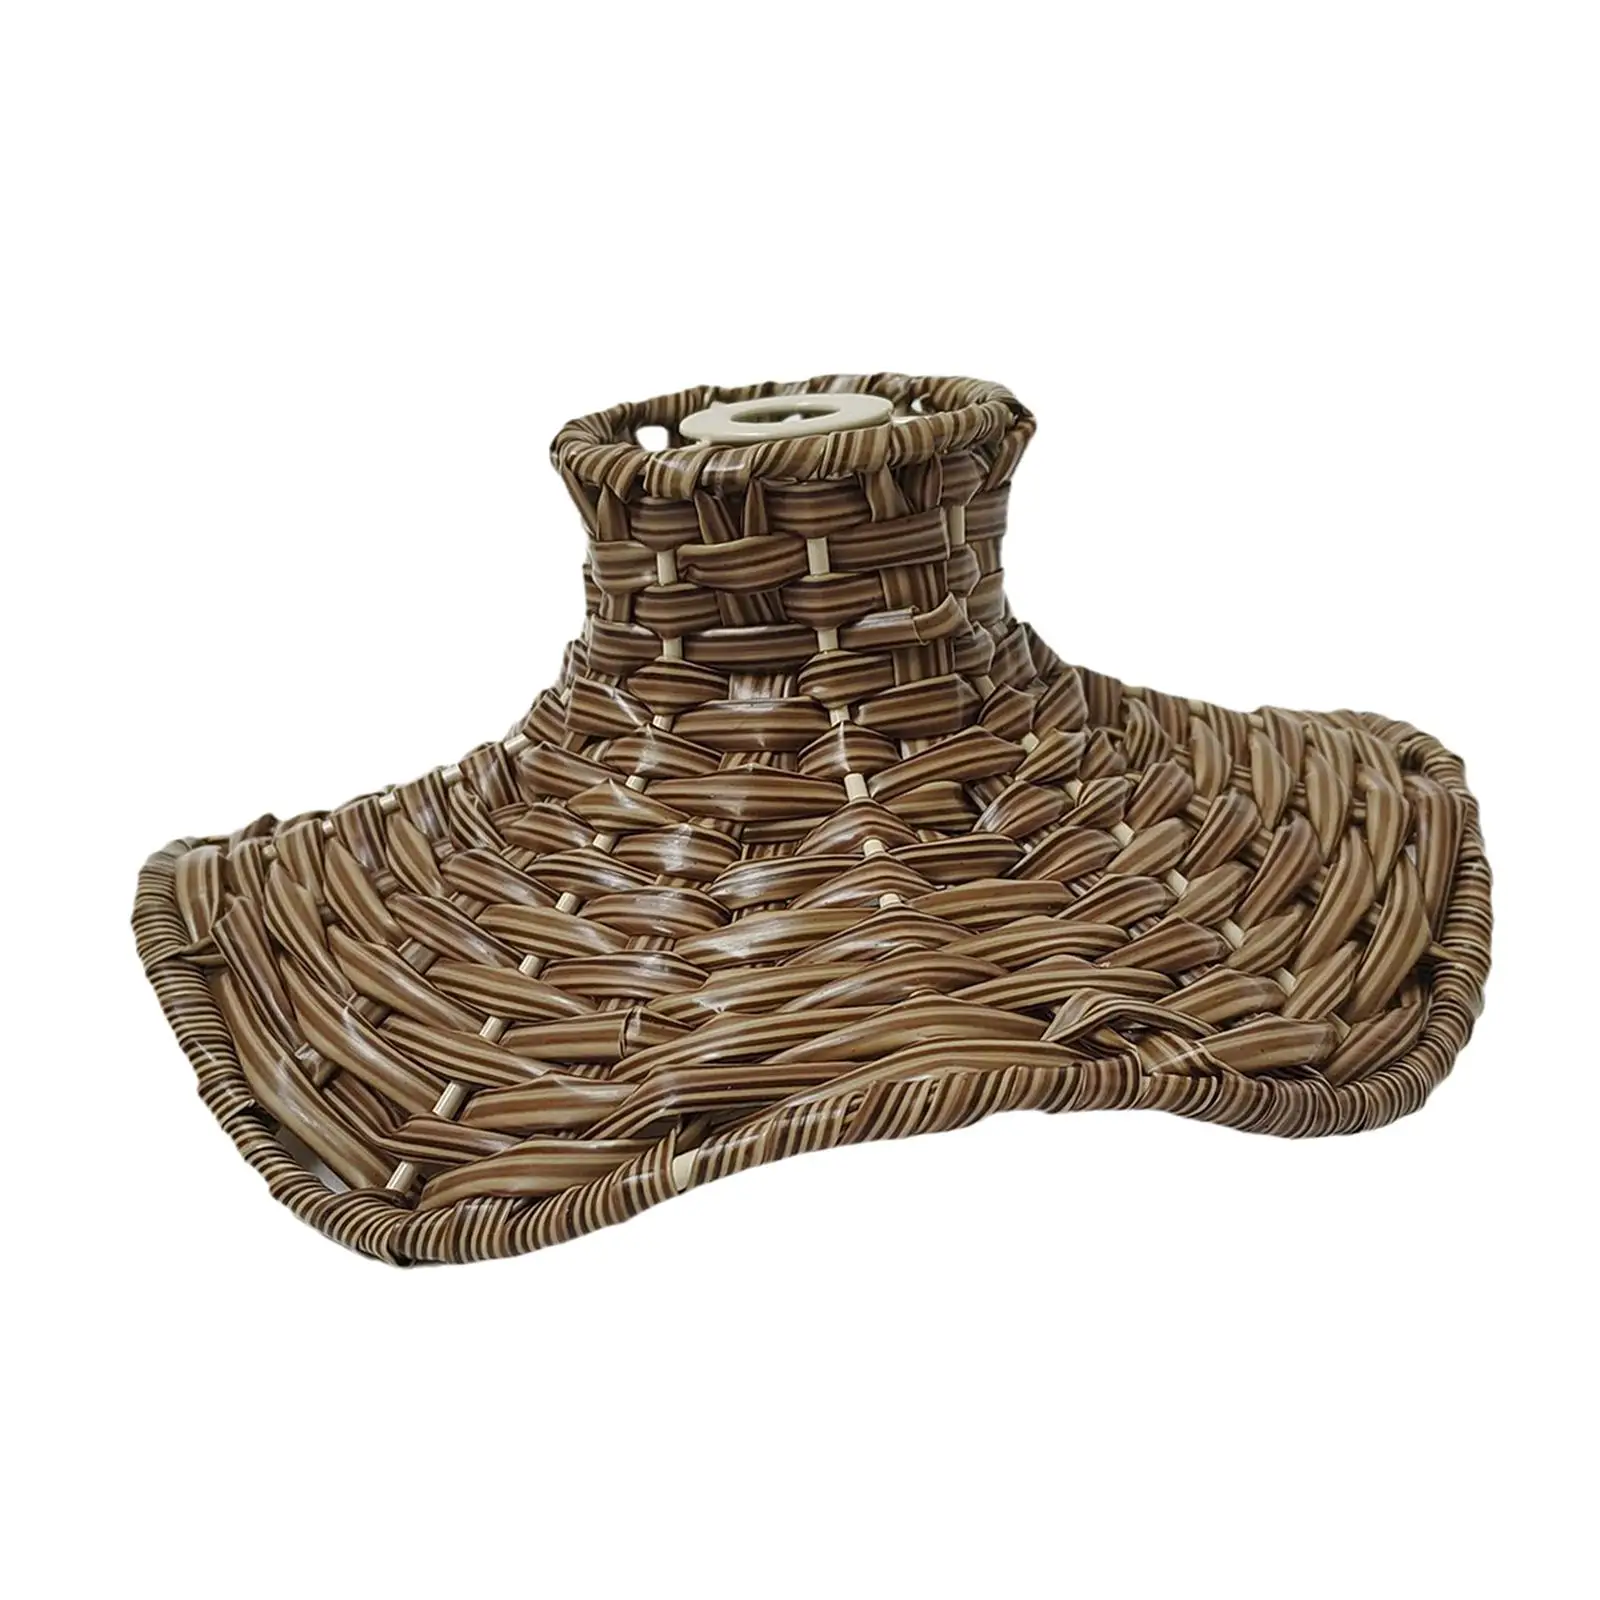 Hanging Rattan Lampshade Chandelier Lampshade for Home Dinning Room